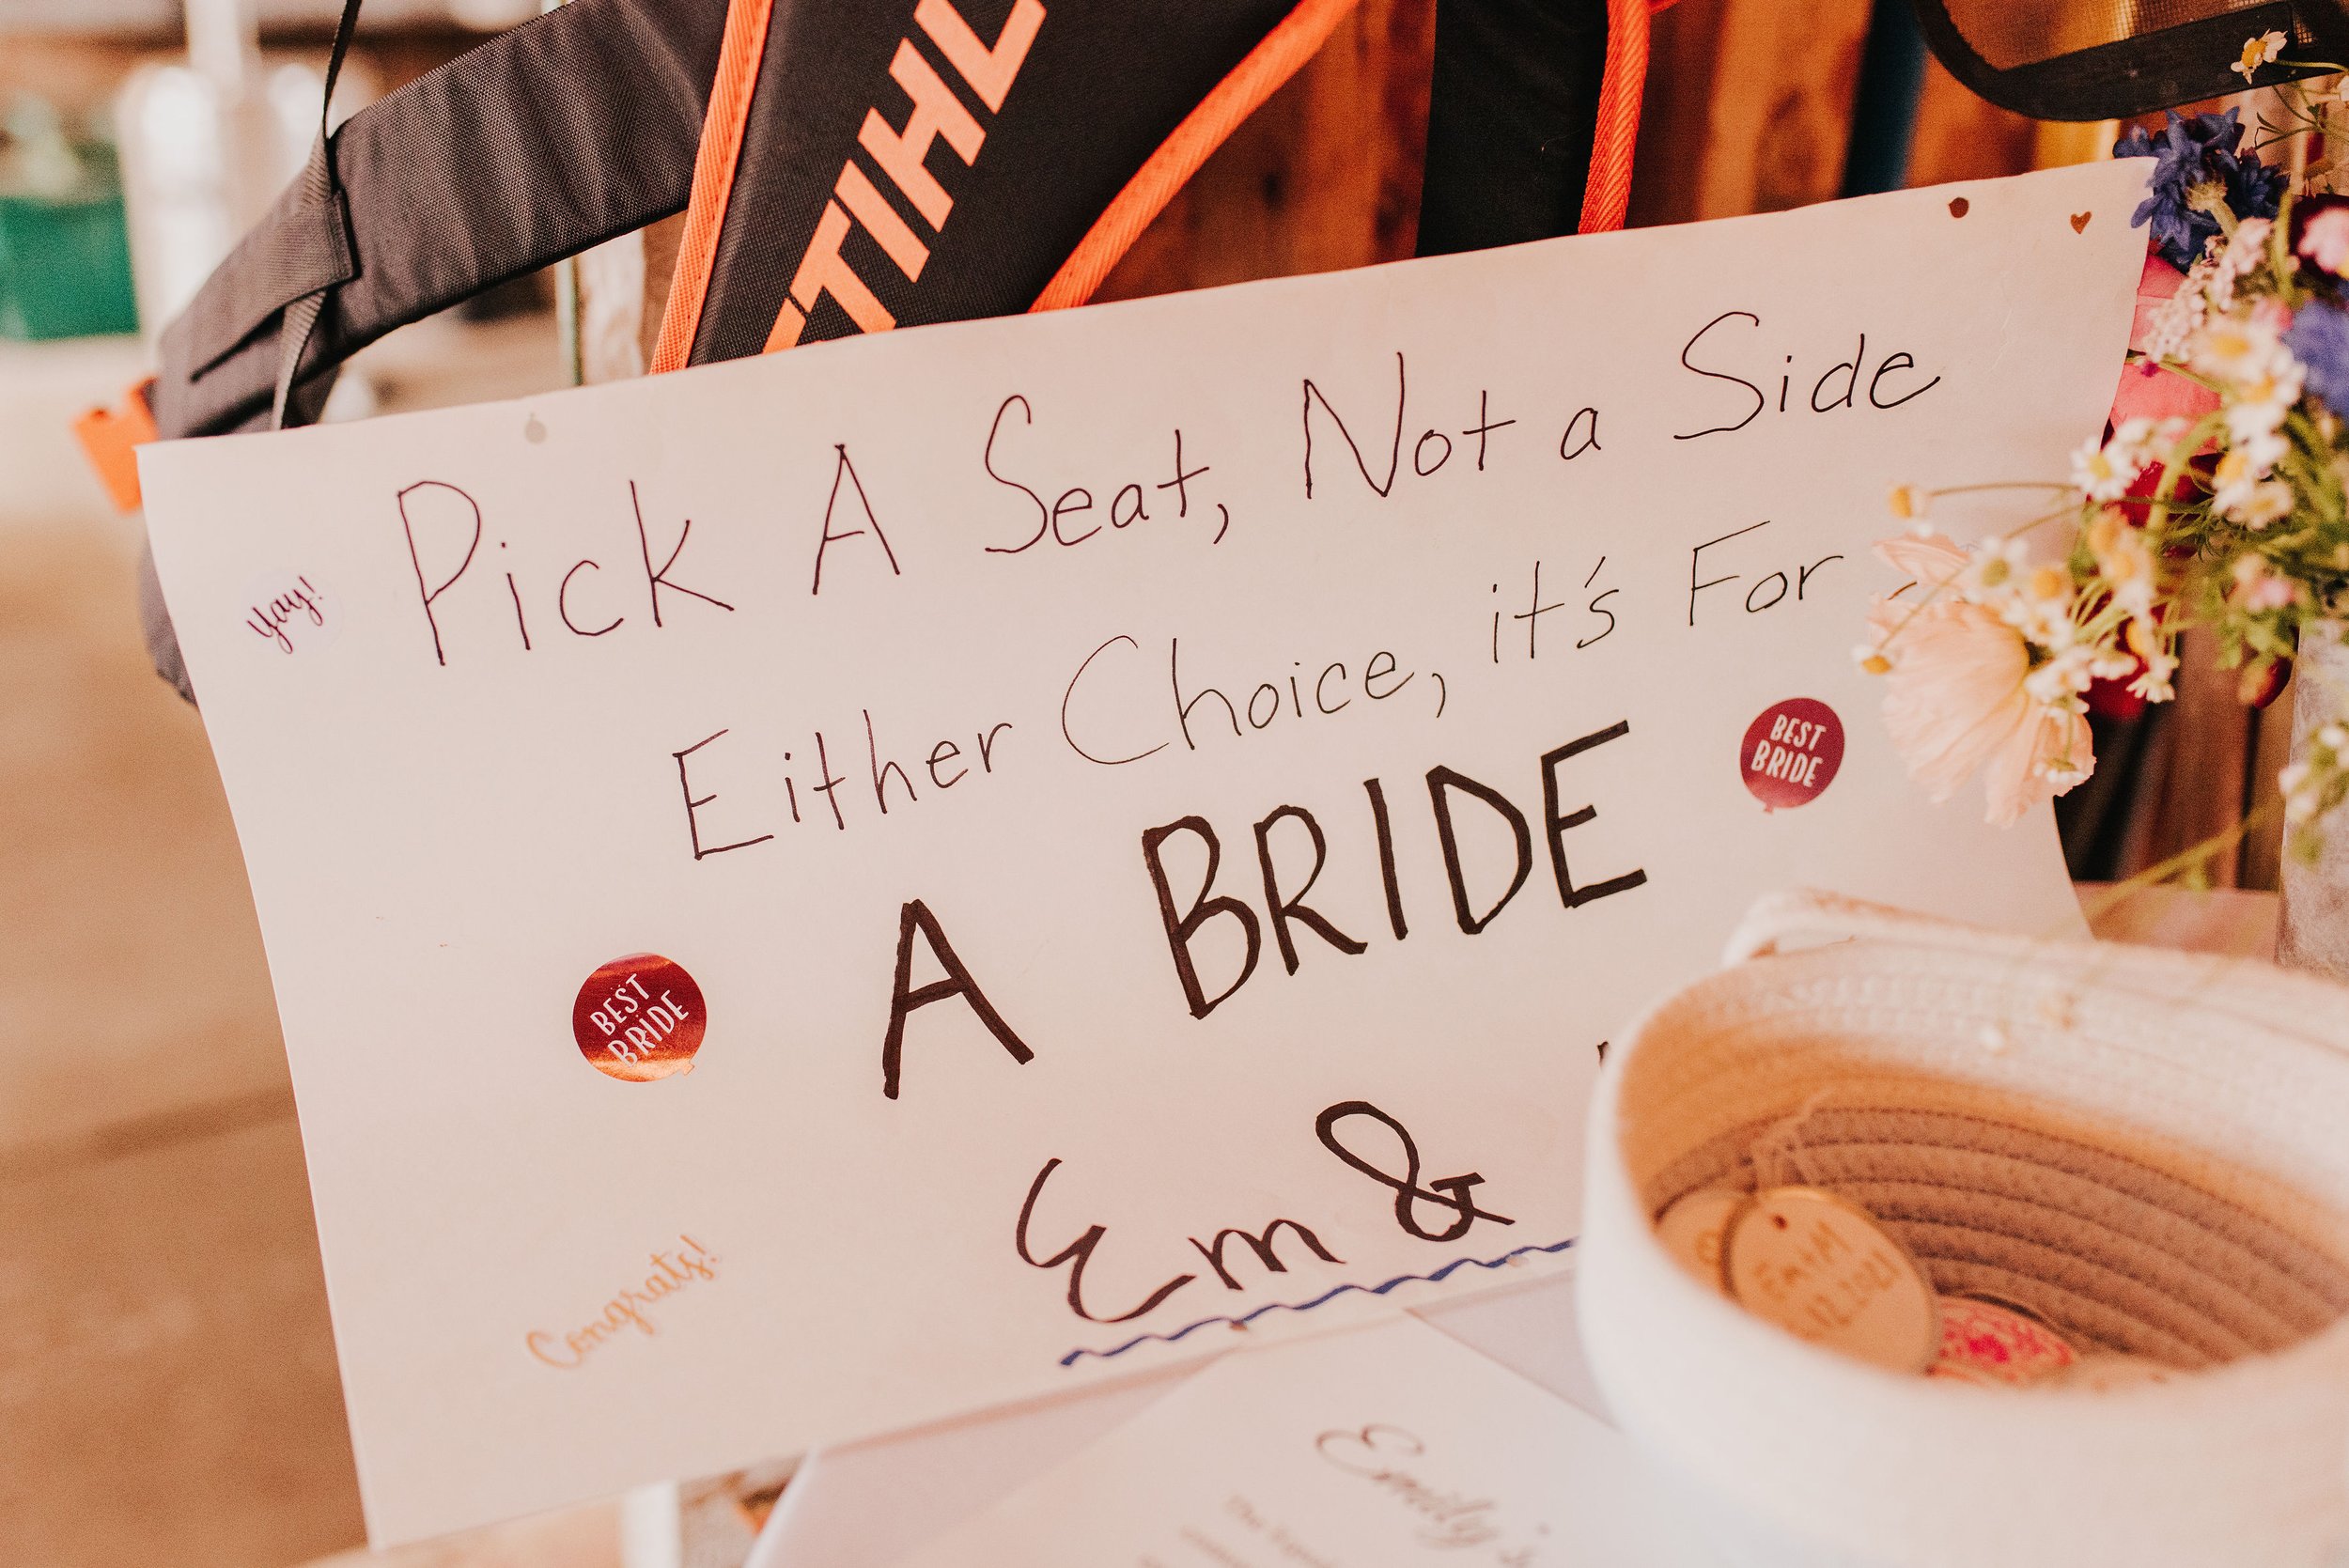  A sign on white paper reads “Pick A Seat, Not A Side, Either Choice, it’s For a  Bride” 